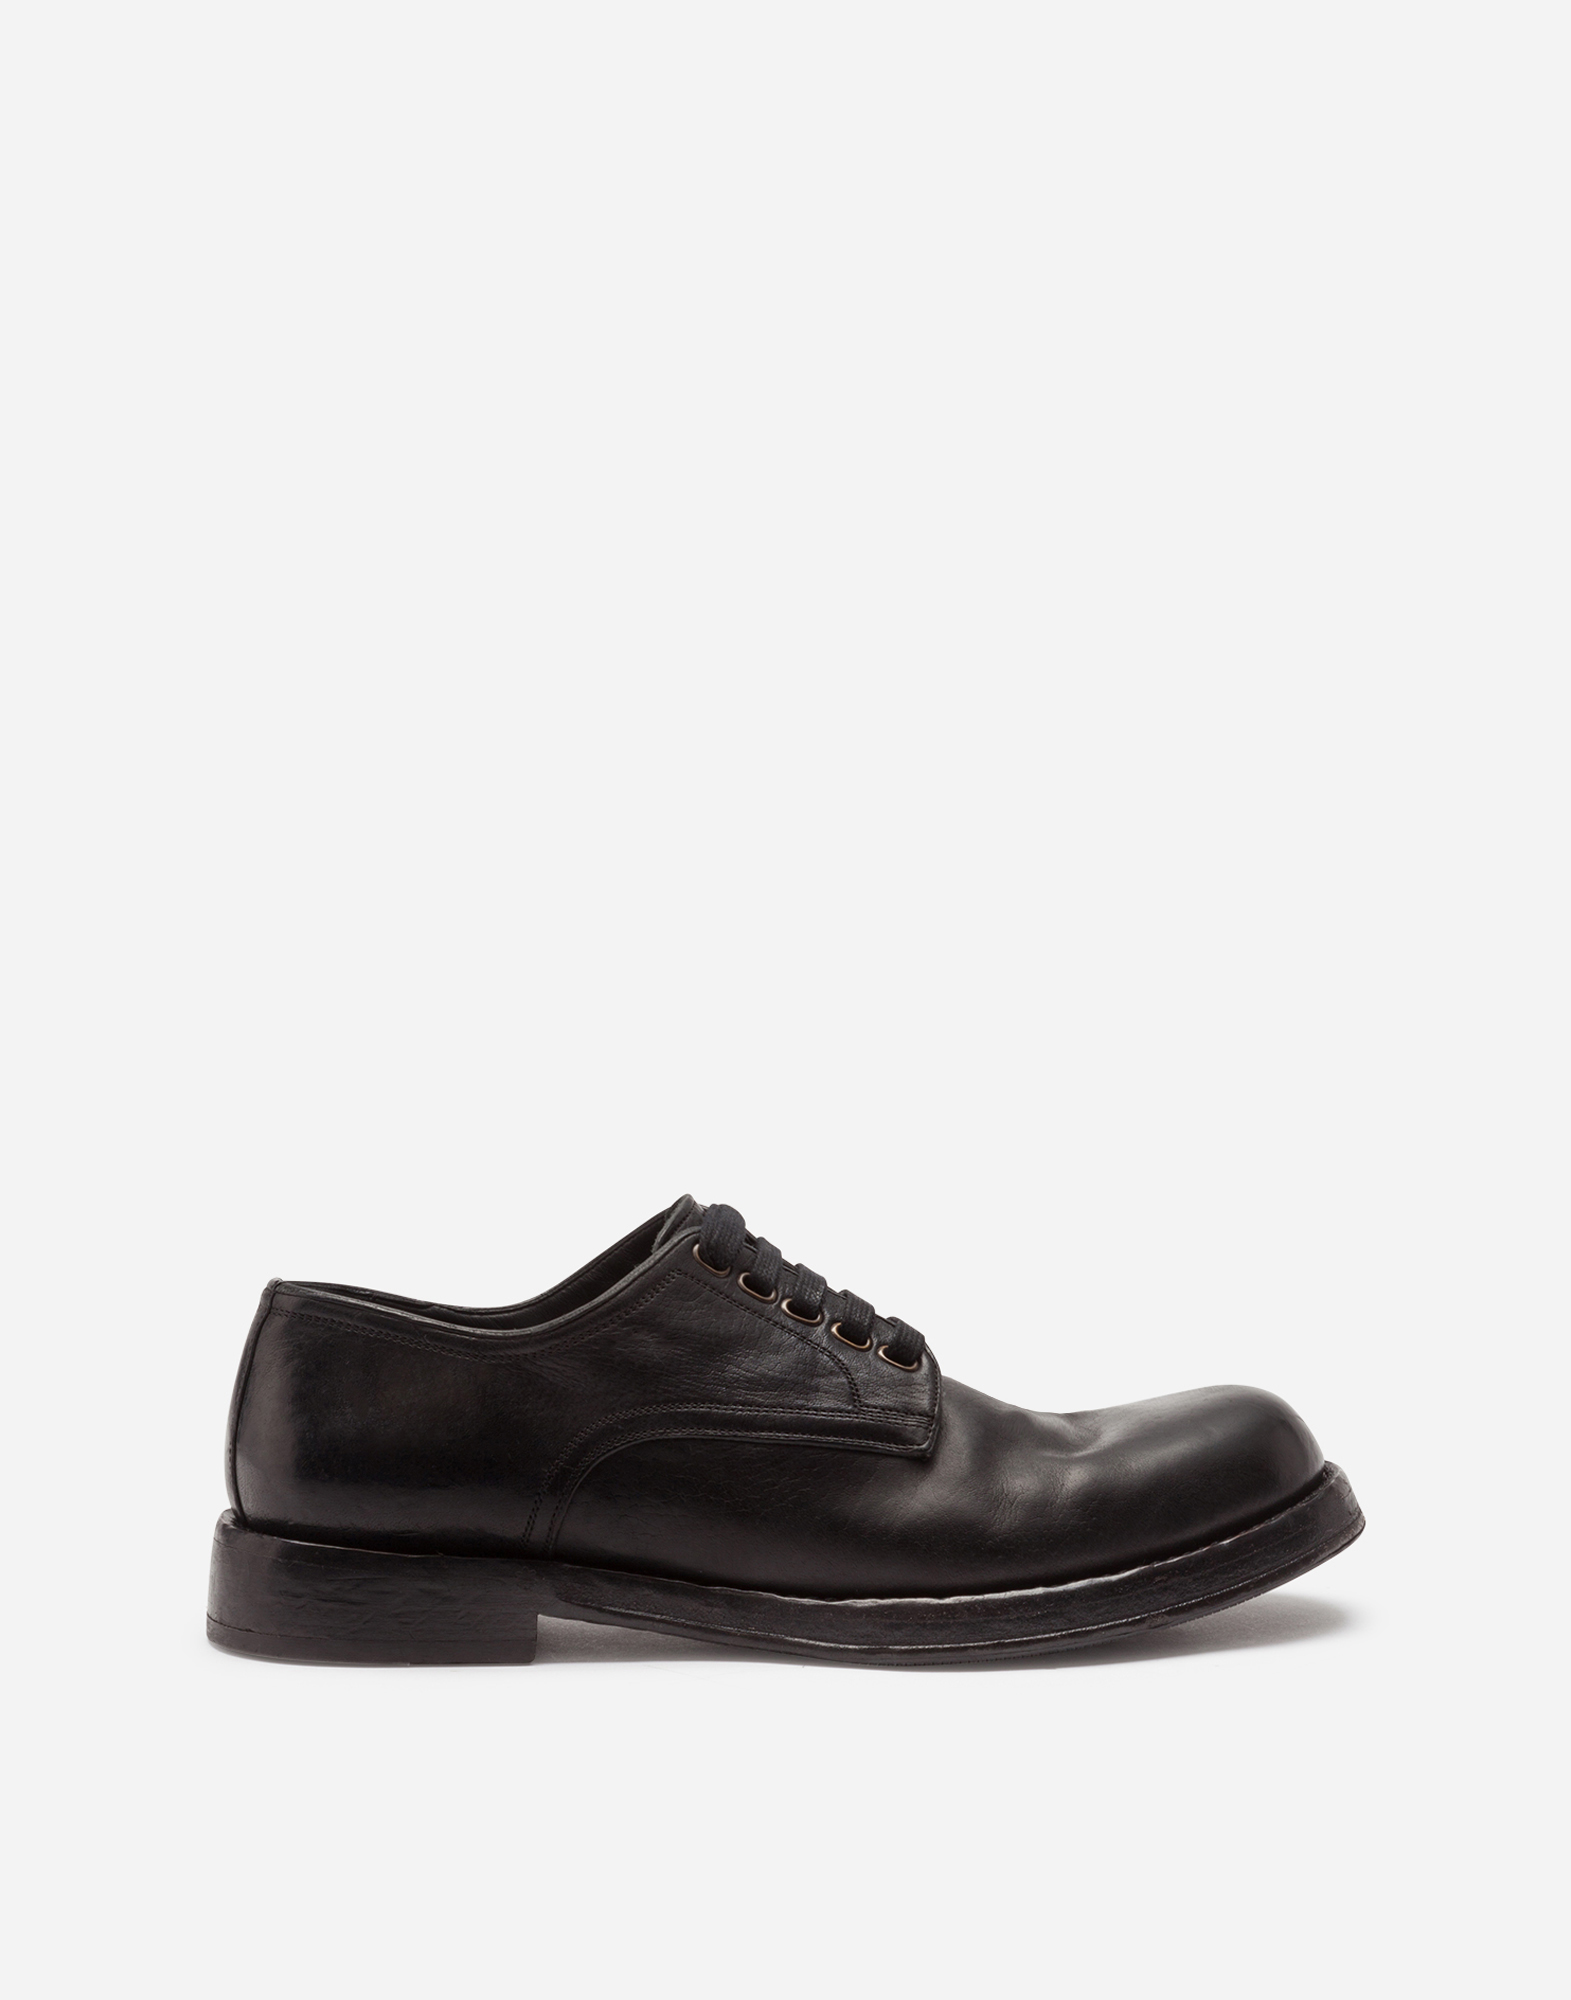 DOLCE & GABBANA HORSEHIDE DERBY SHOES